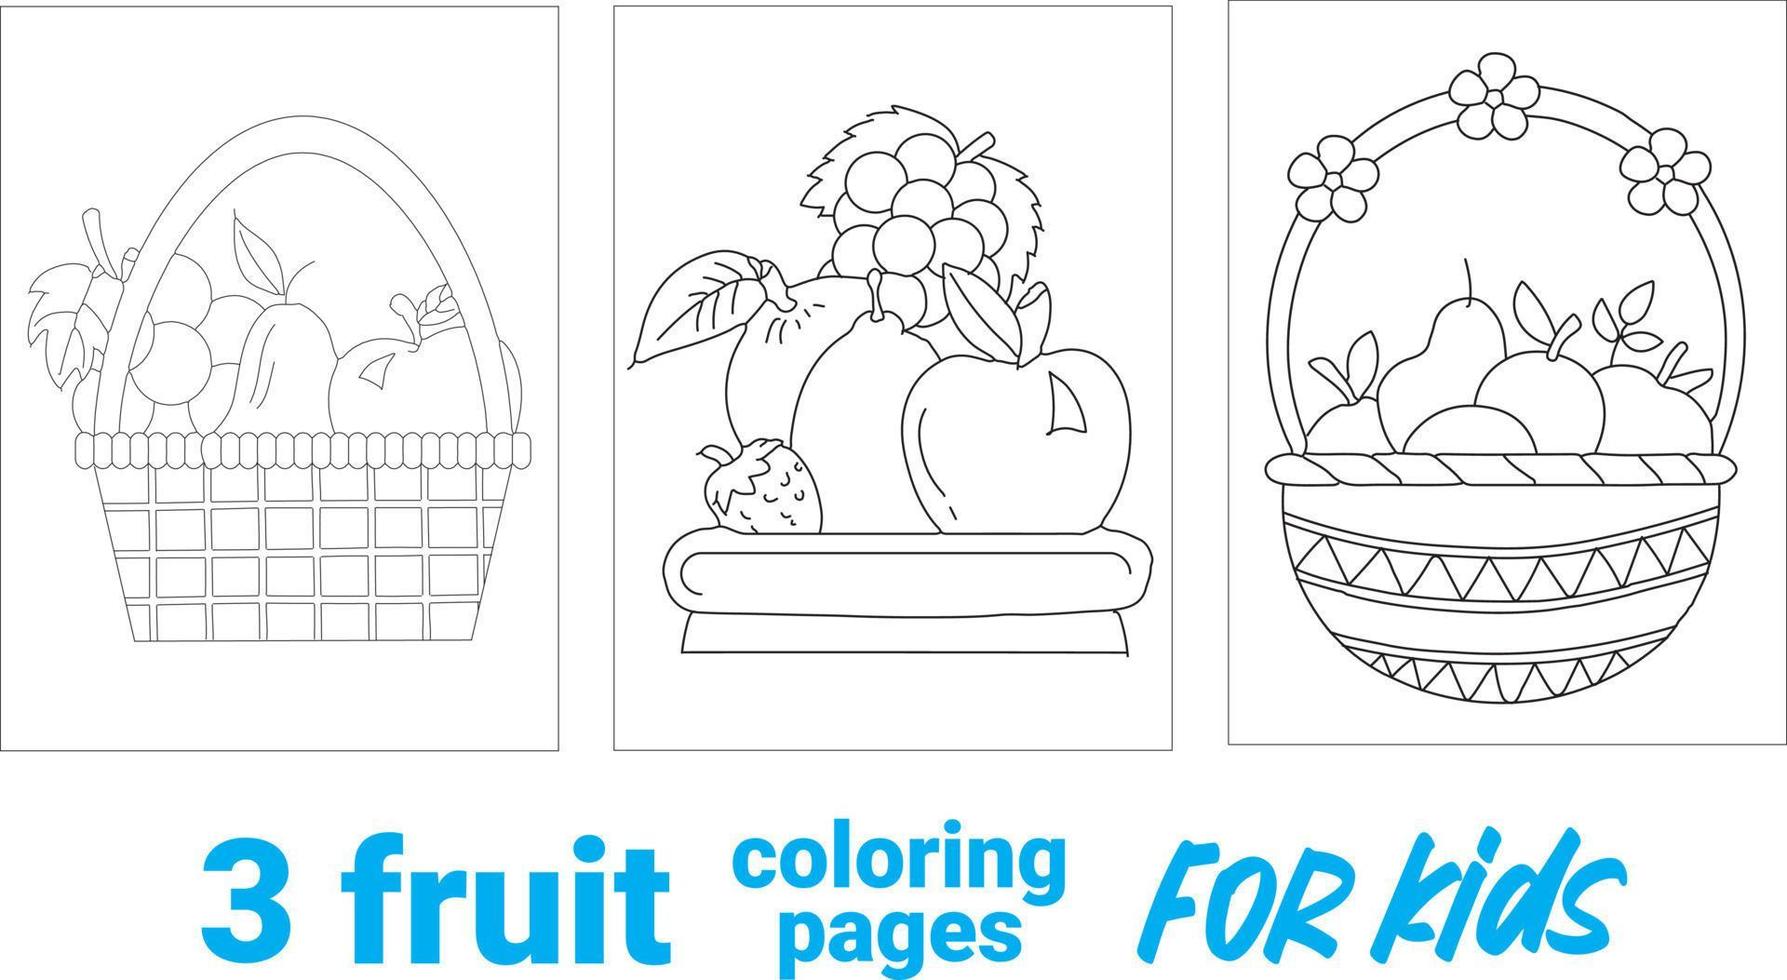 Black and White for coloring, Coloring Book, Fruits and vegetables for coloring book, Citrus fruits lobule. Hand drawn sketch. Vector illustration isolated on white background. Coloring book page.